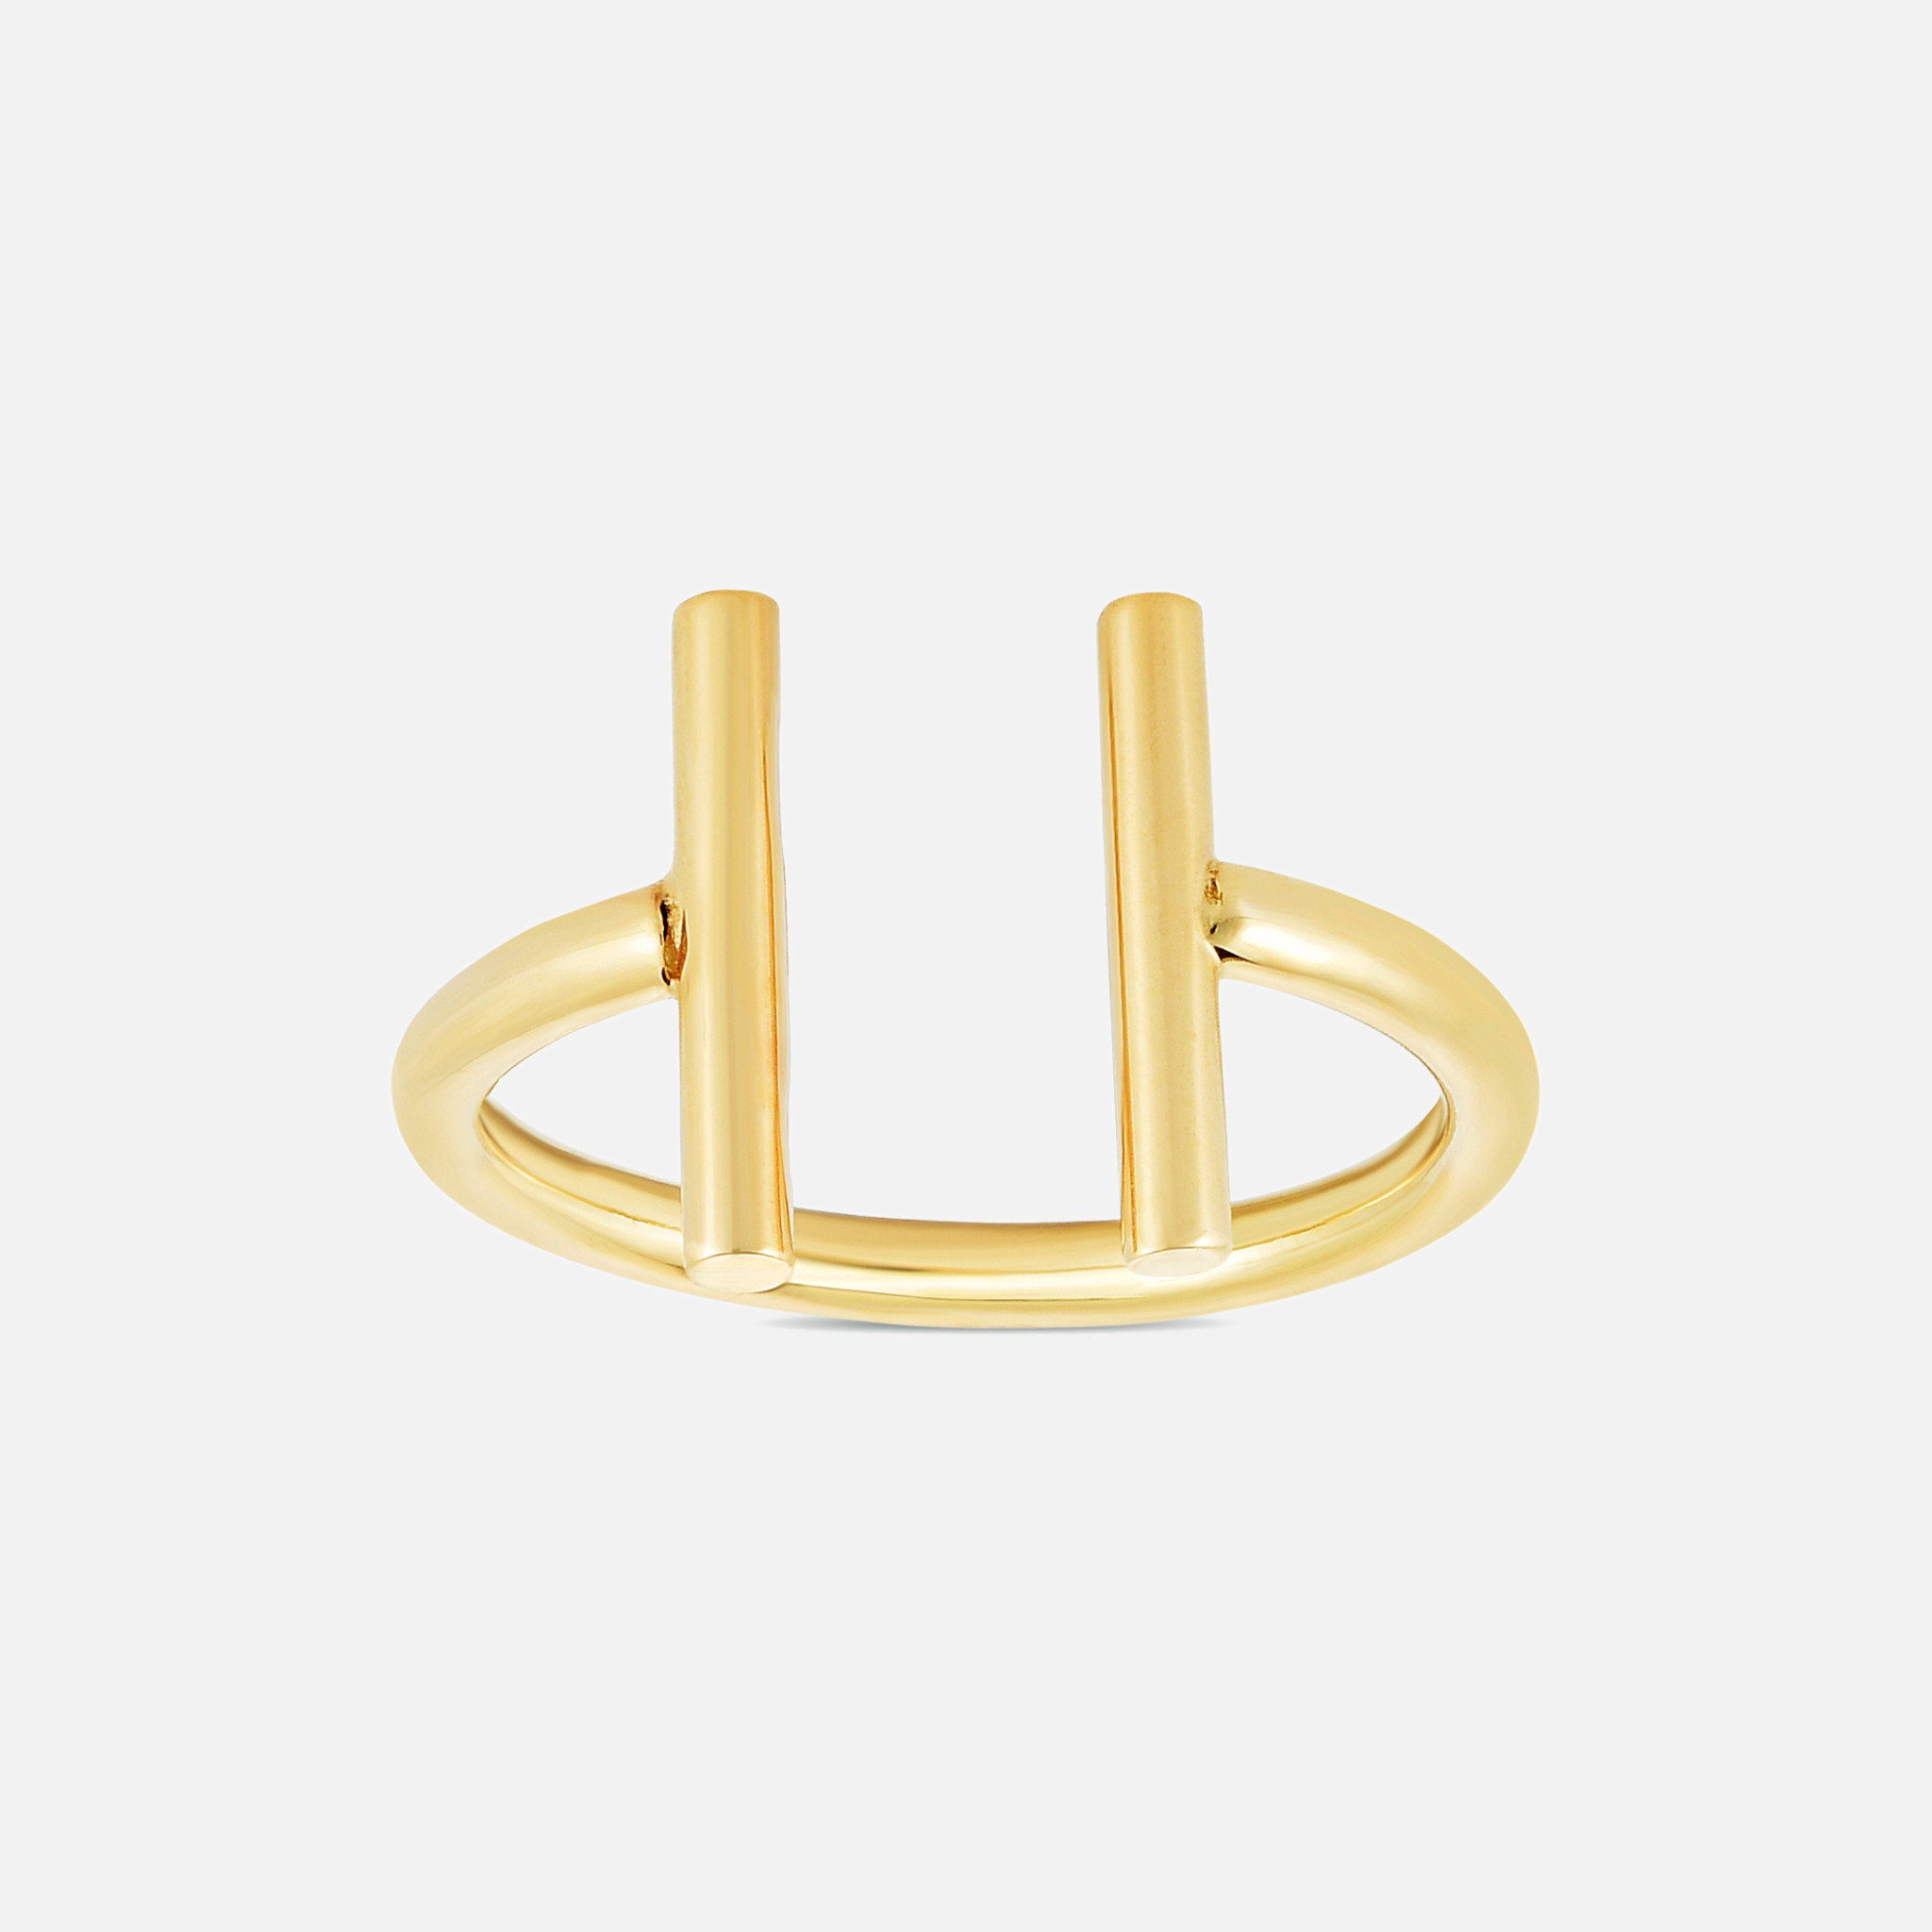 Featuring a linear modern design, this double bar T ring is made of shiny 14k gold.